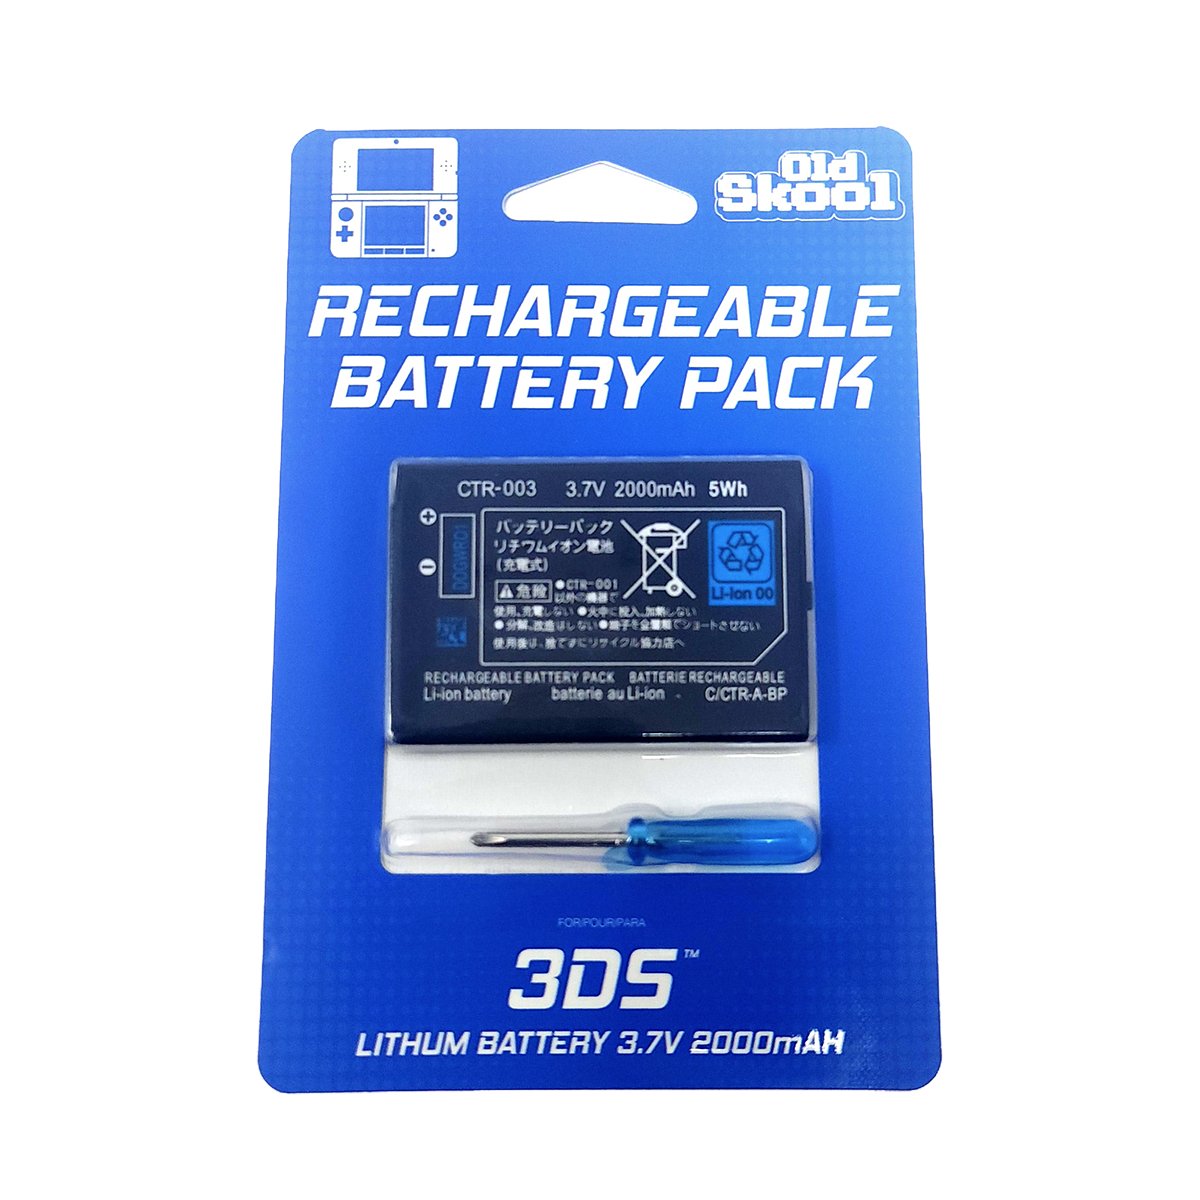 Rechargeable Battery Pack for Nintendo 3DS - Old Skool - Retro Island Gaming